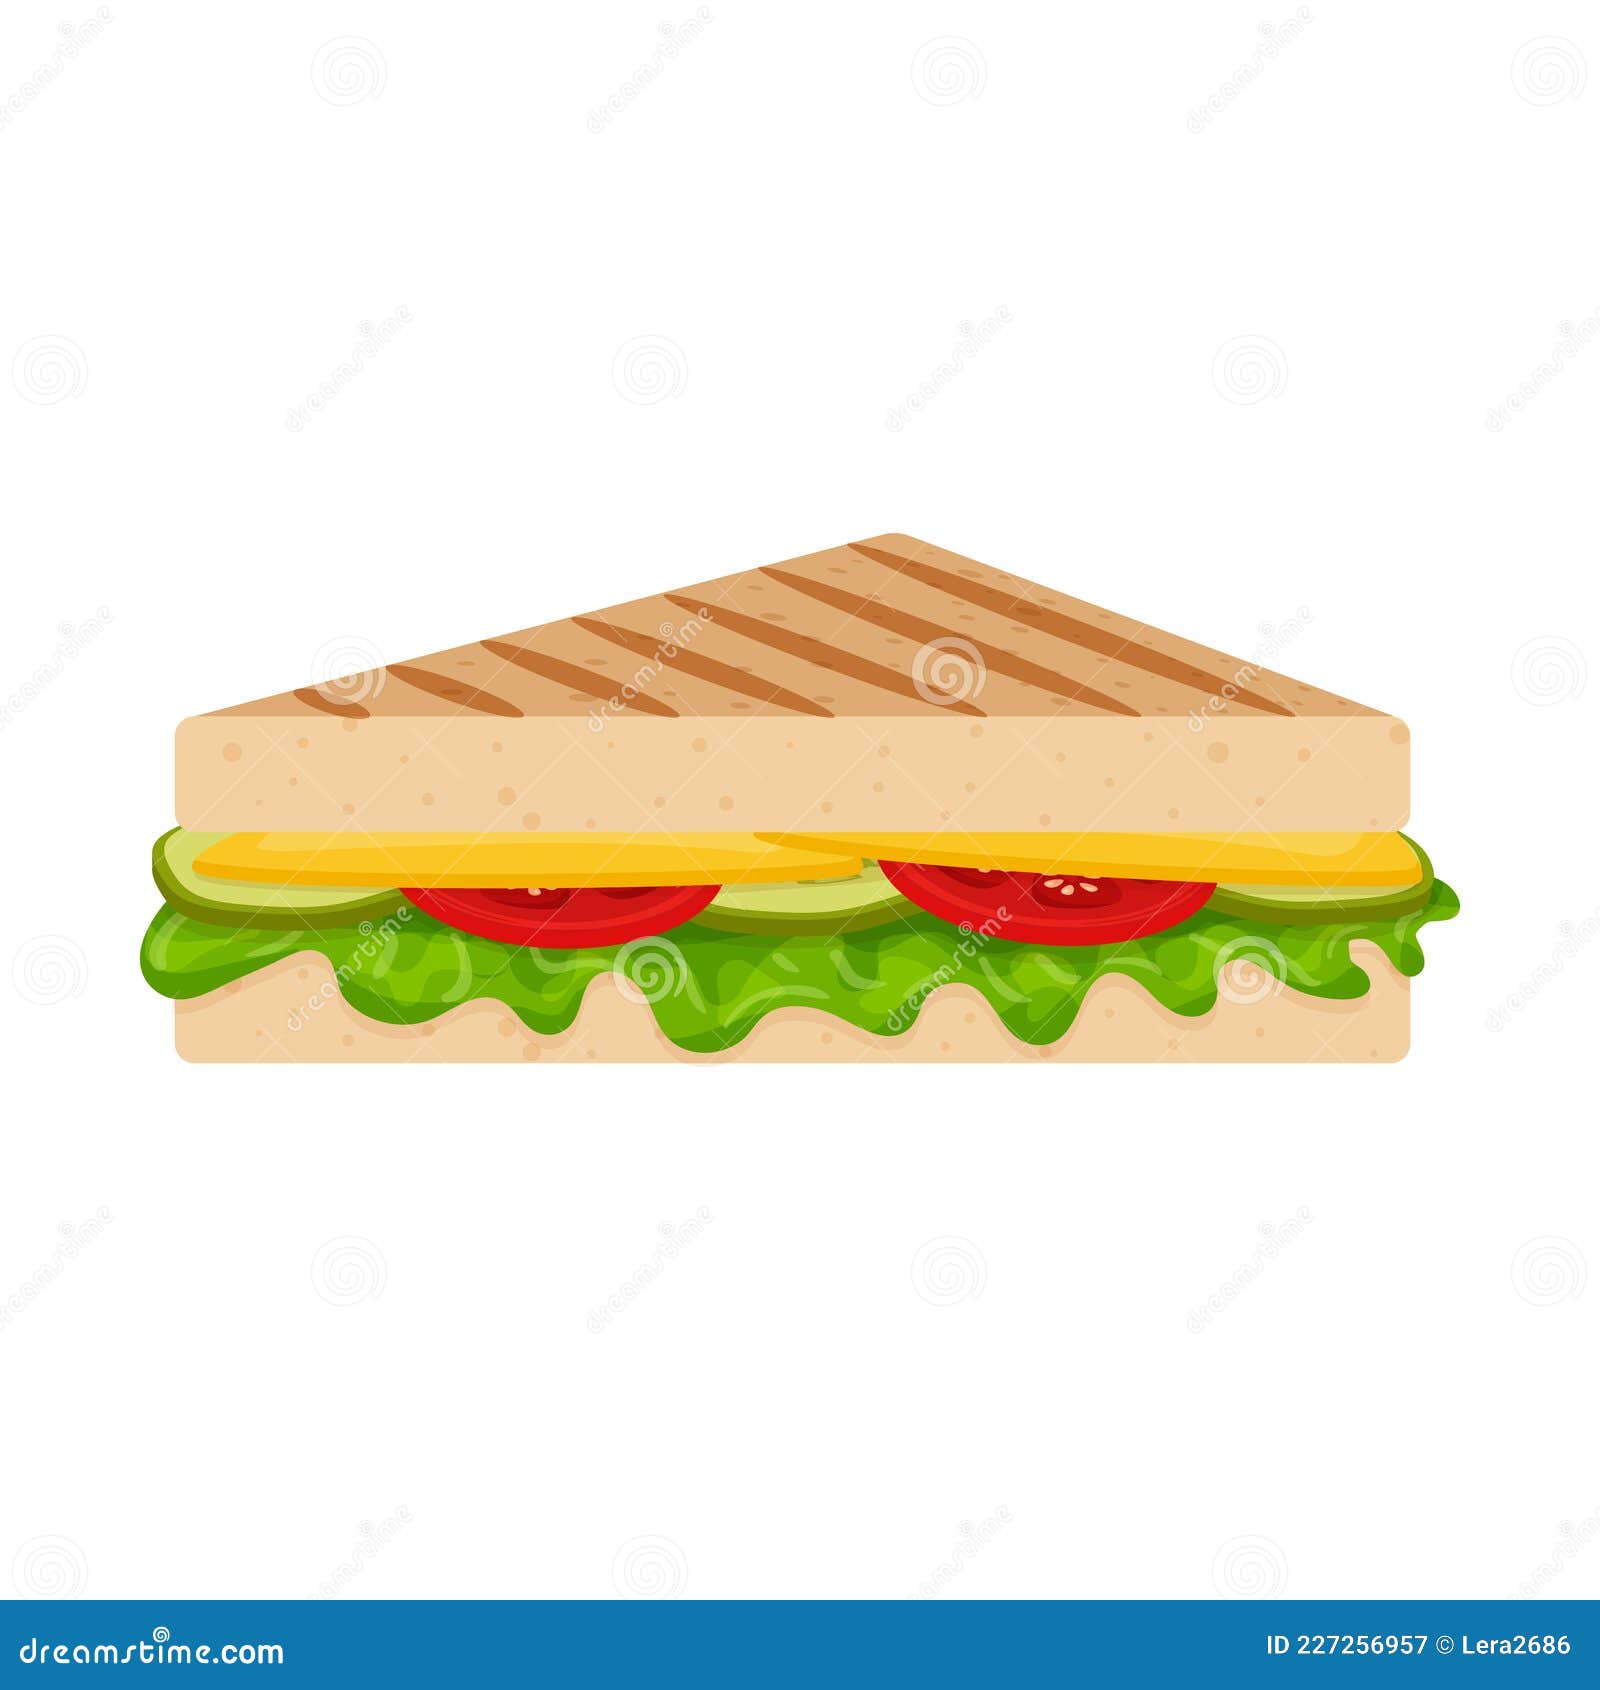 Grilled Sandwich with Herbs, Cheese, Tomatoes and Cucumbers. Fast Food,  Snacks Stock Vector - Illustration of design, crustless: 227256957